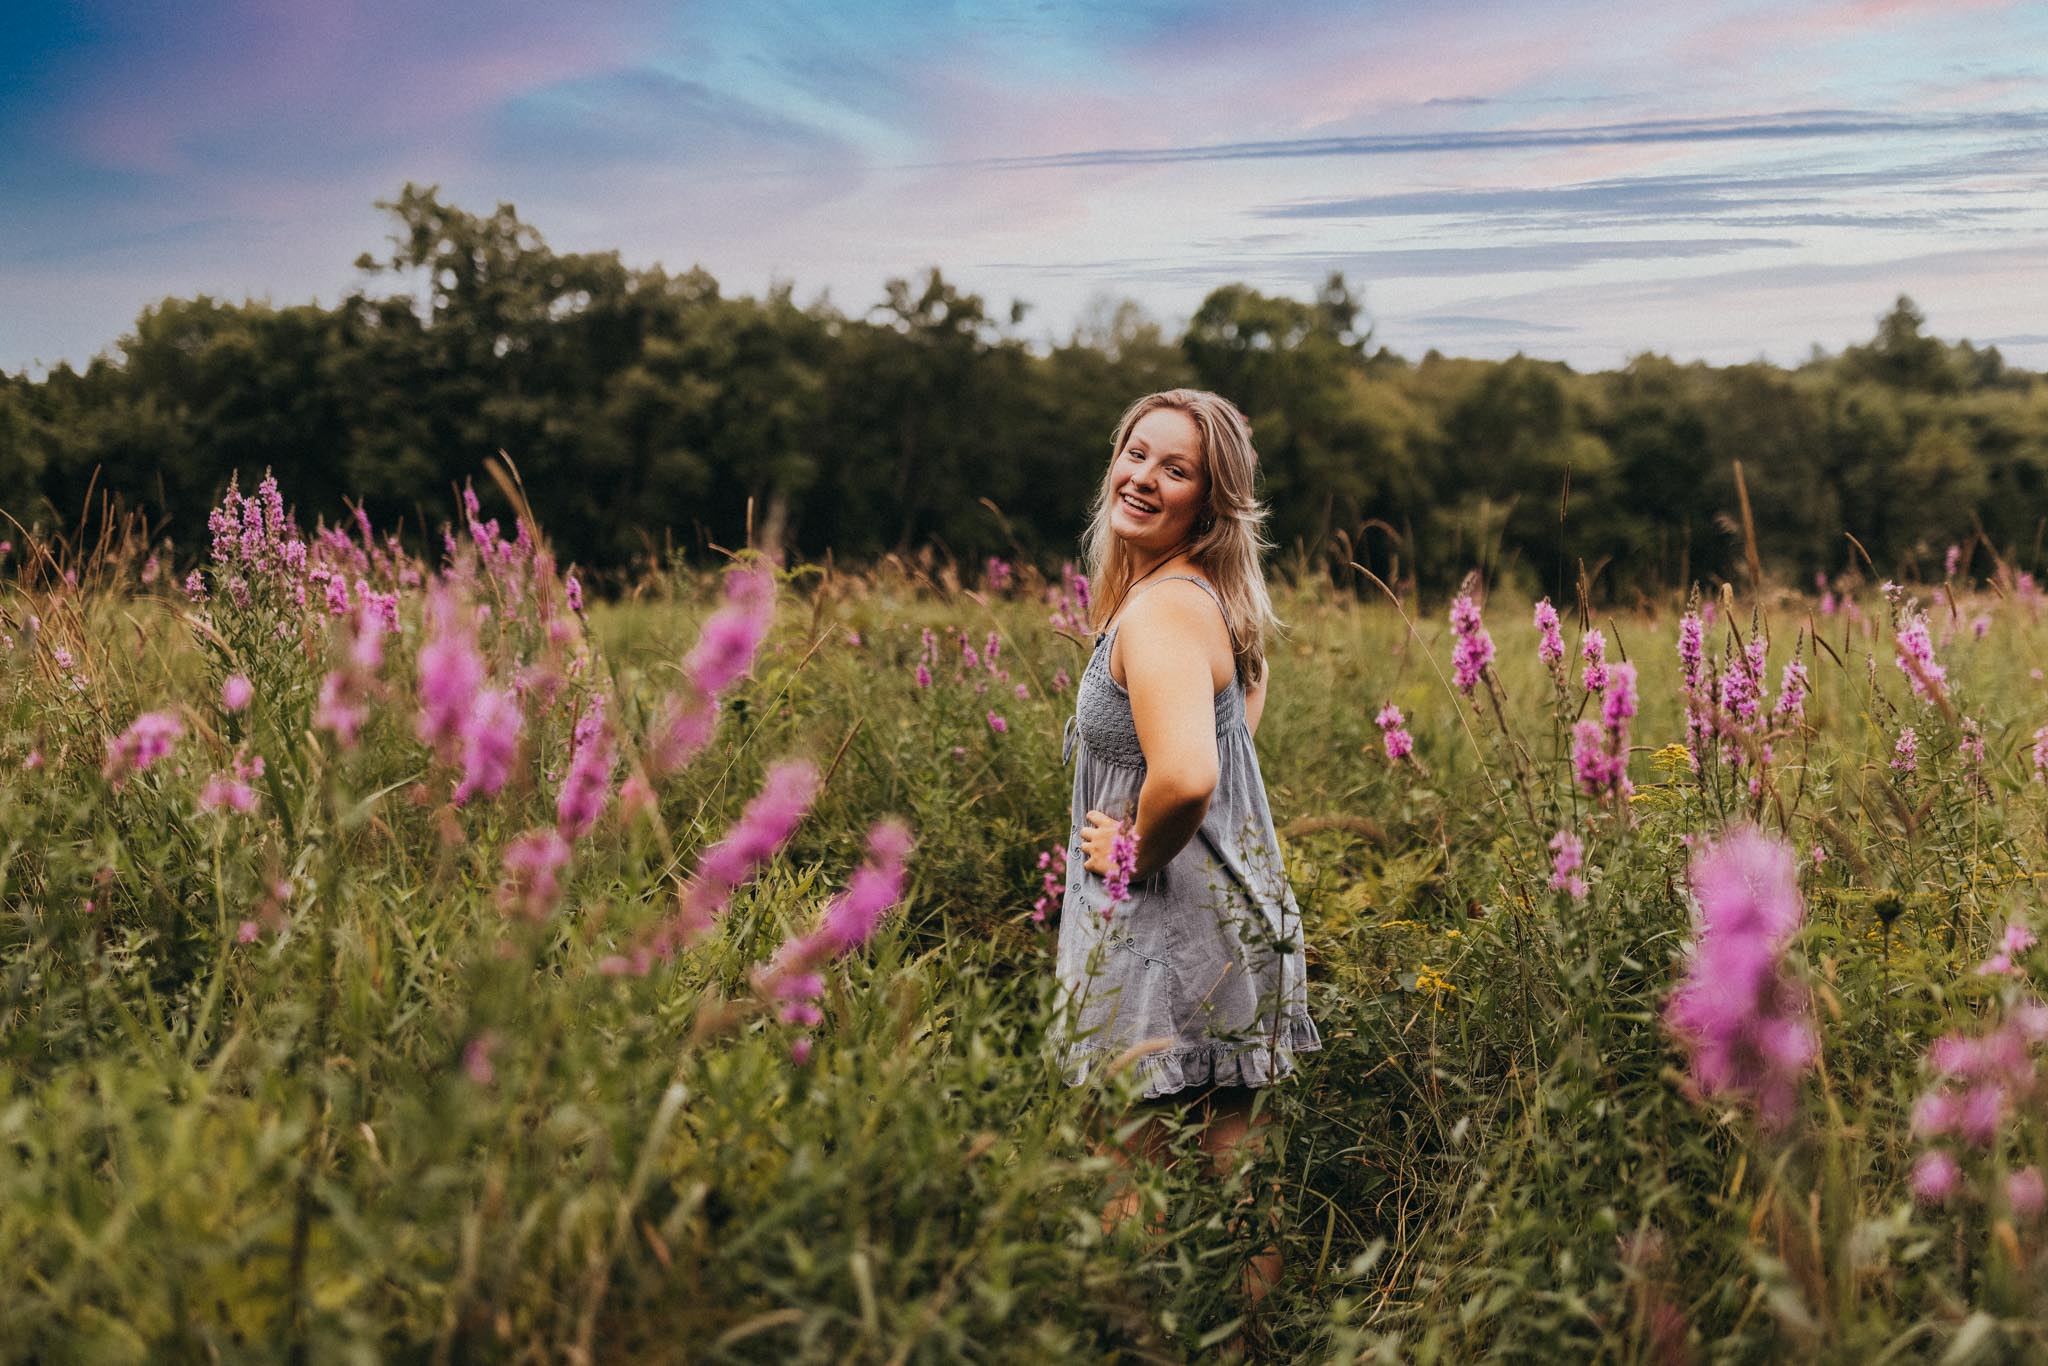 Summer senior portrait of a young woman wearing a sundress standing in a field of purple flowers at sunset in Massachuetts